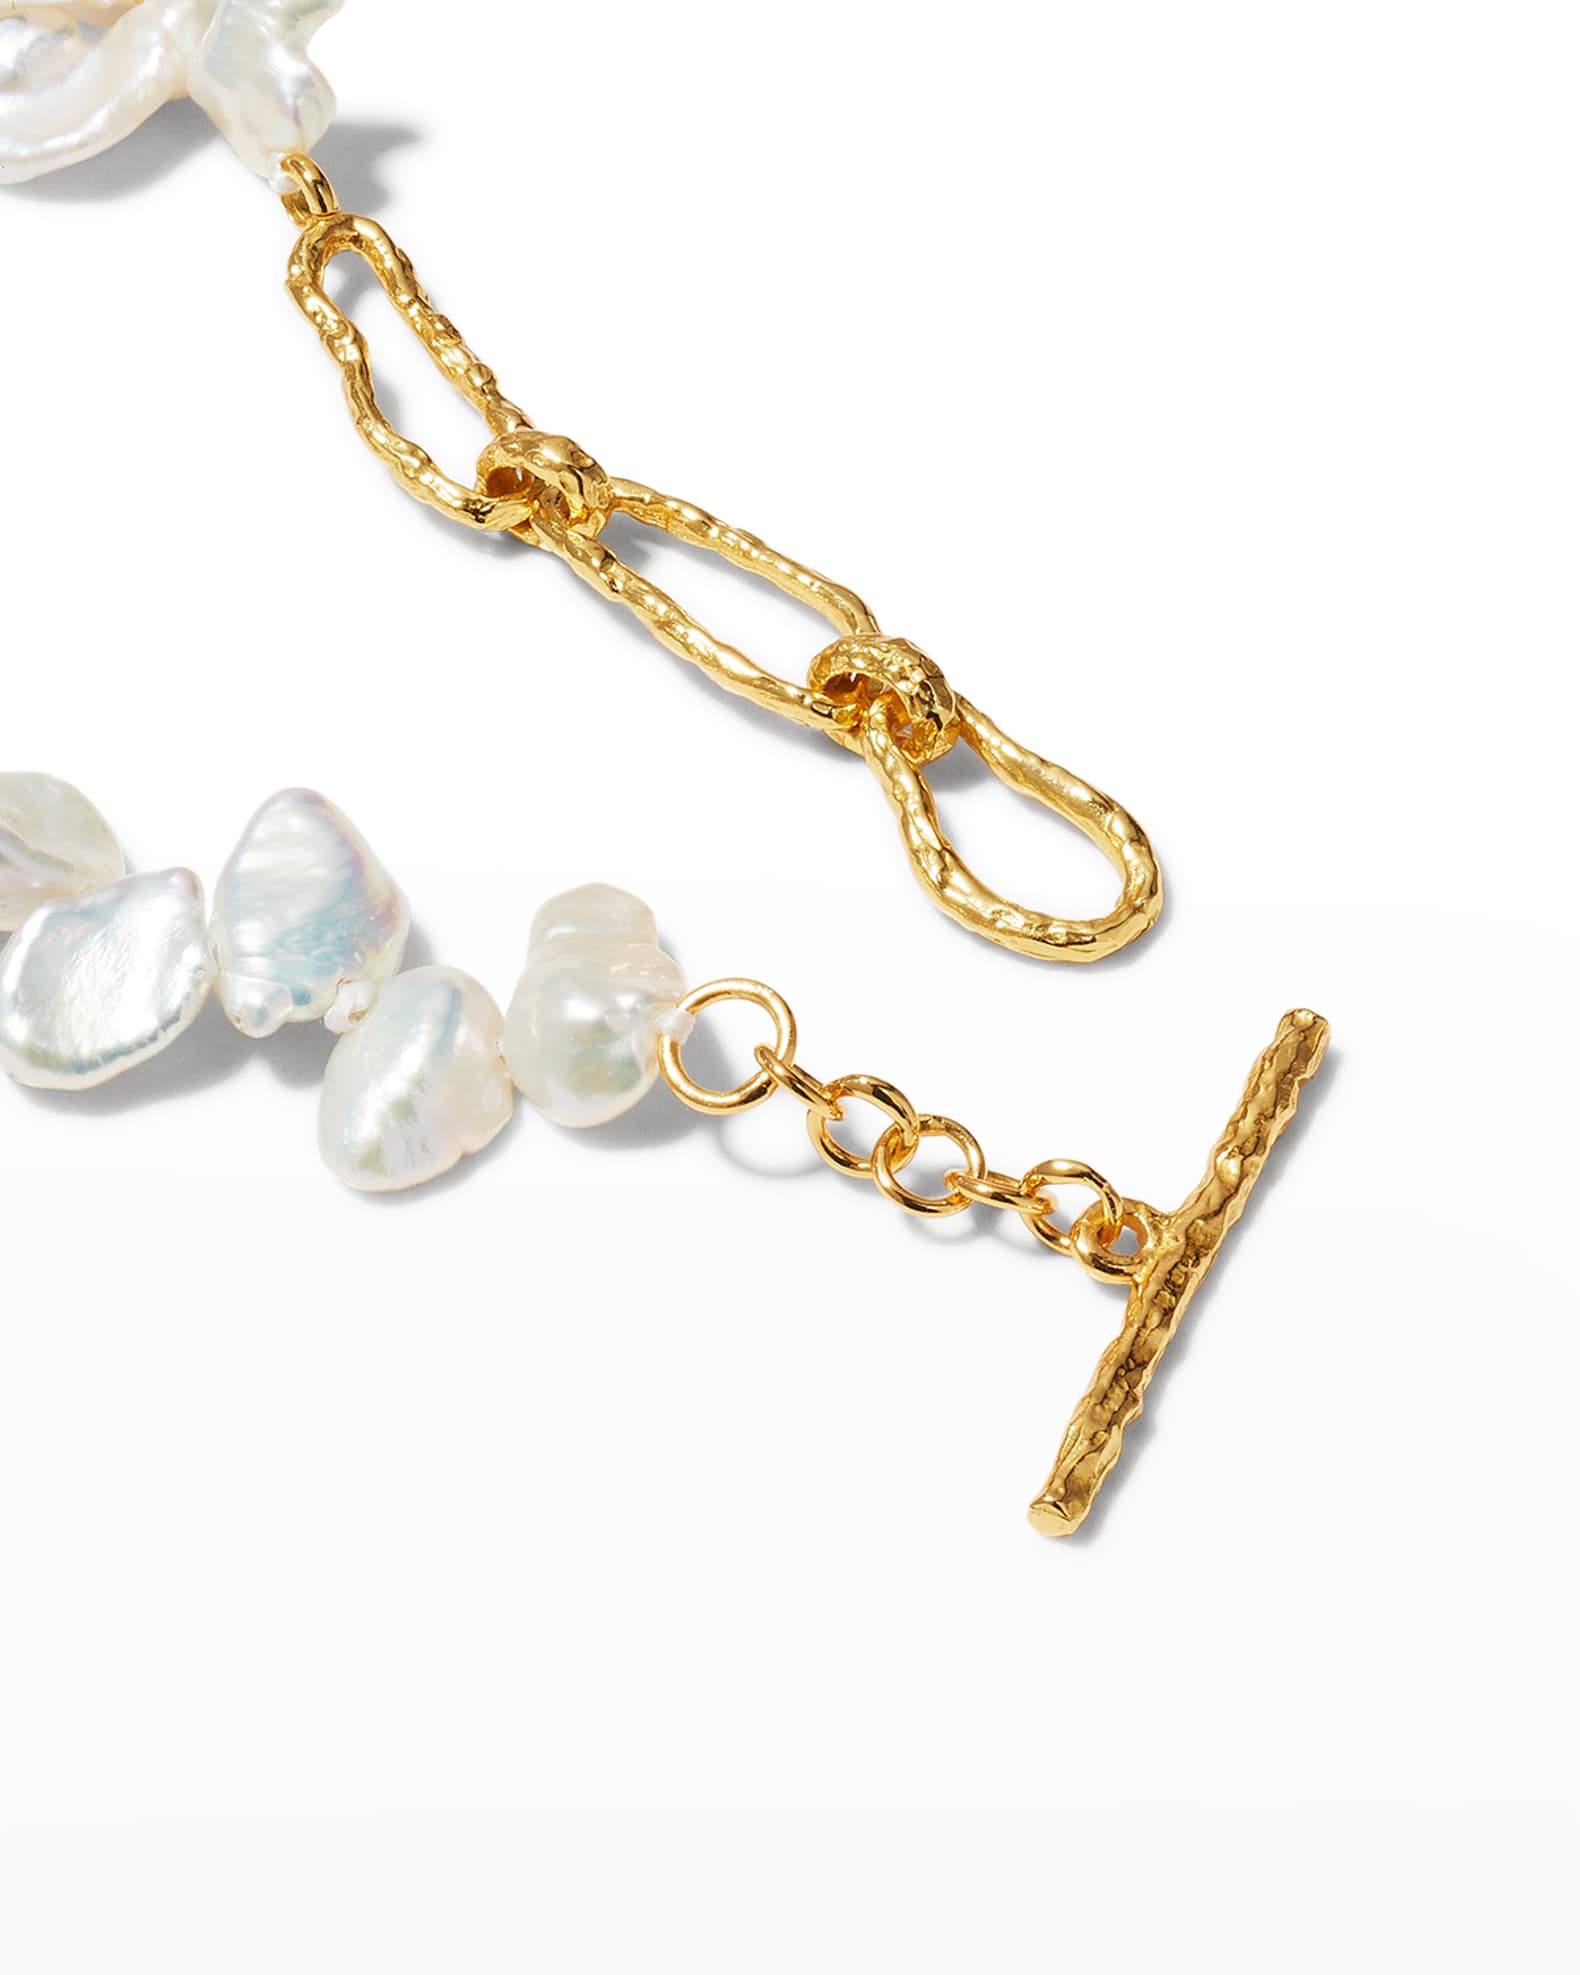 PACHAREE Sapphire and Ruby Vine Necklace with Pearls | Neiman Marcus